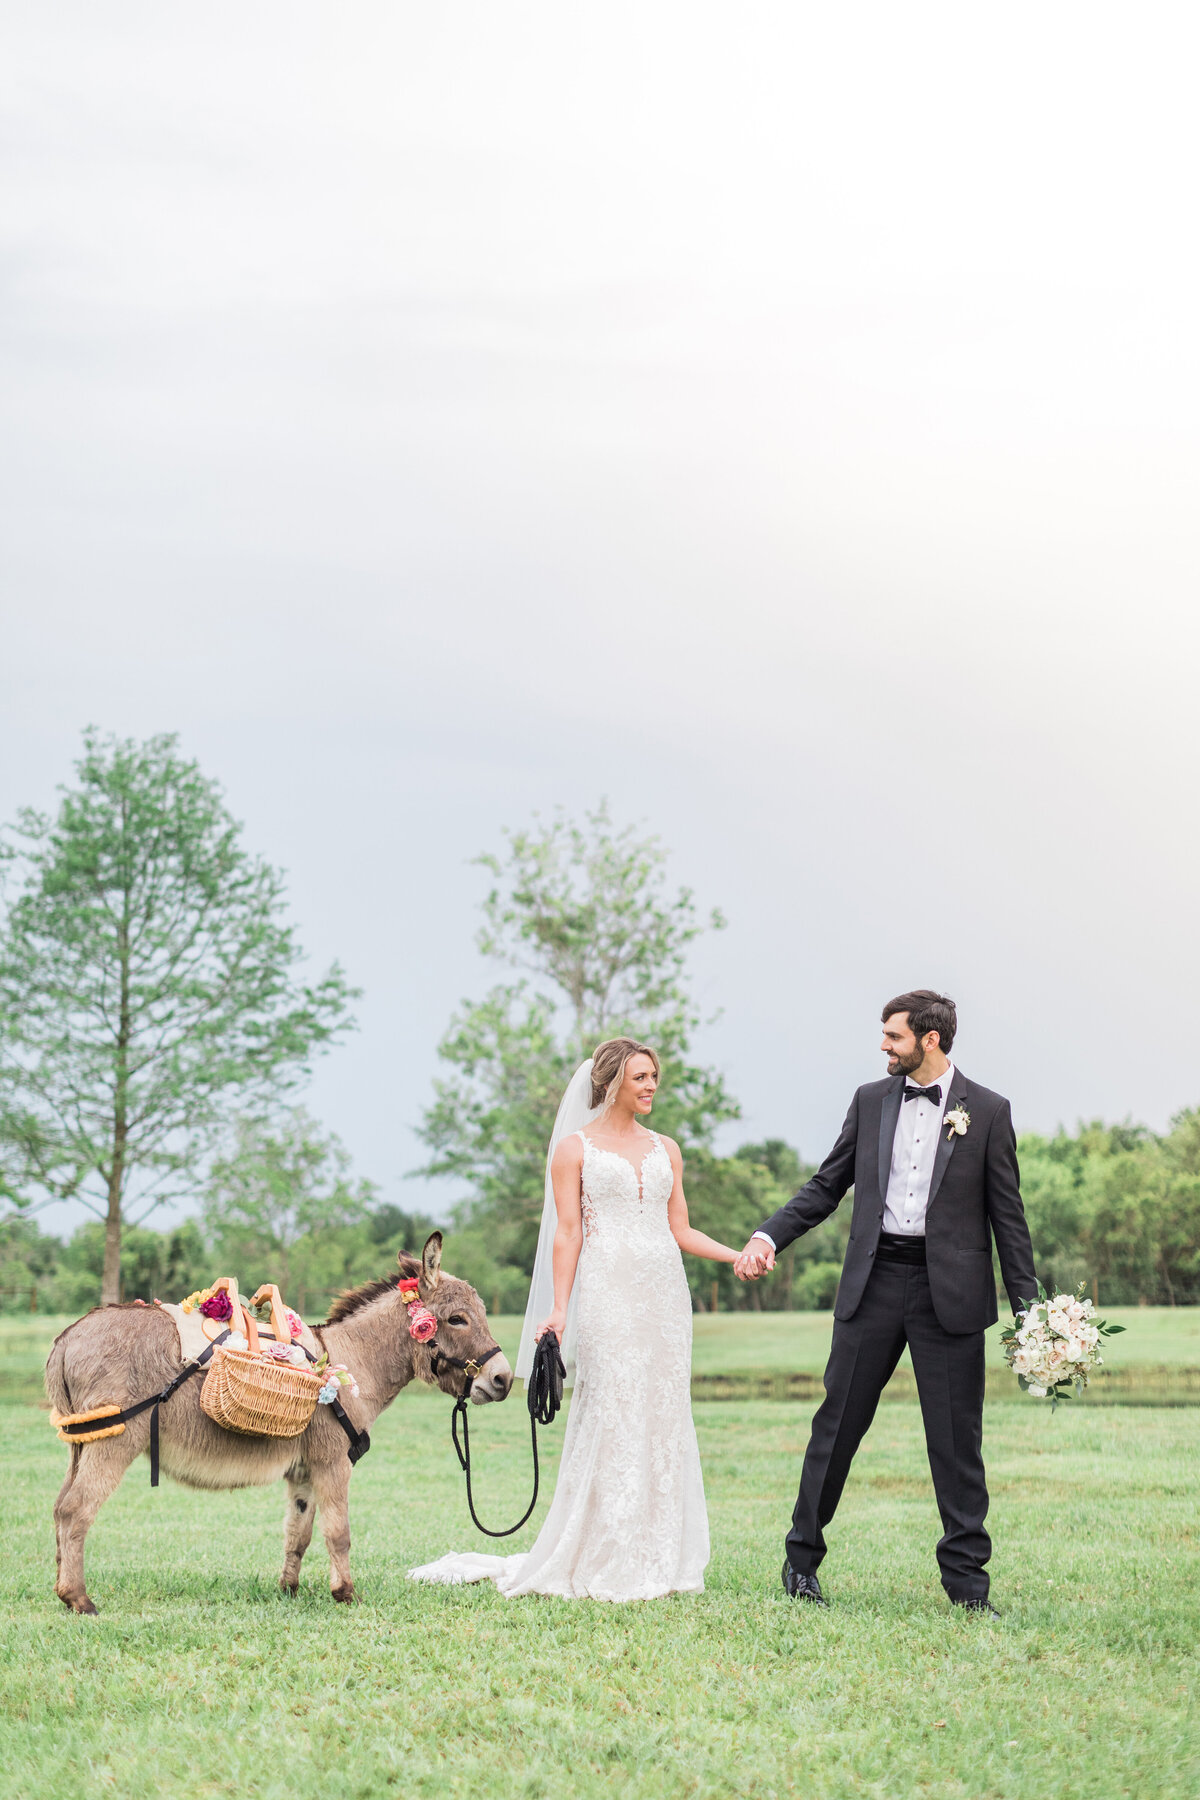 Bride and groom with shot donkey